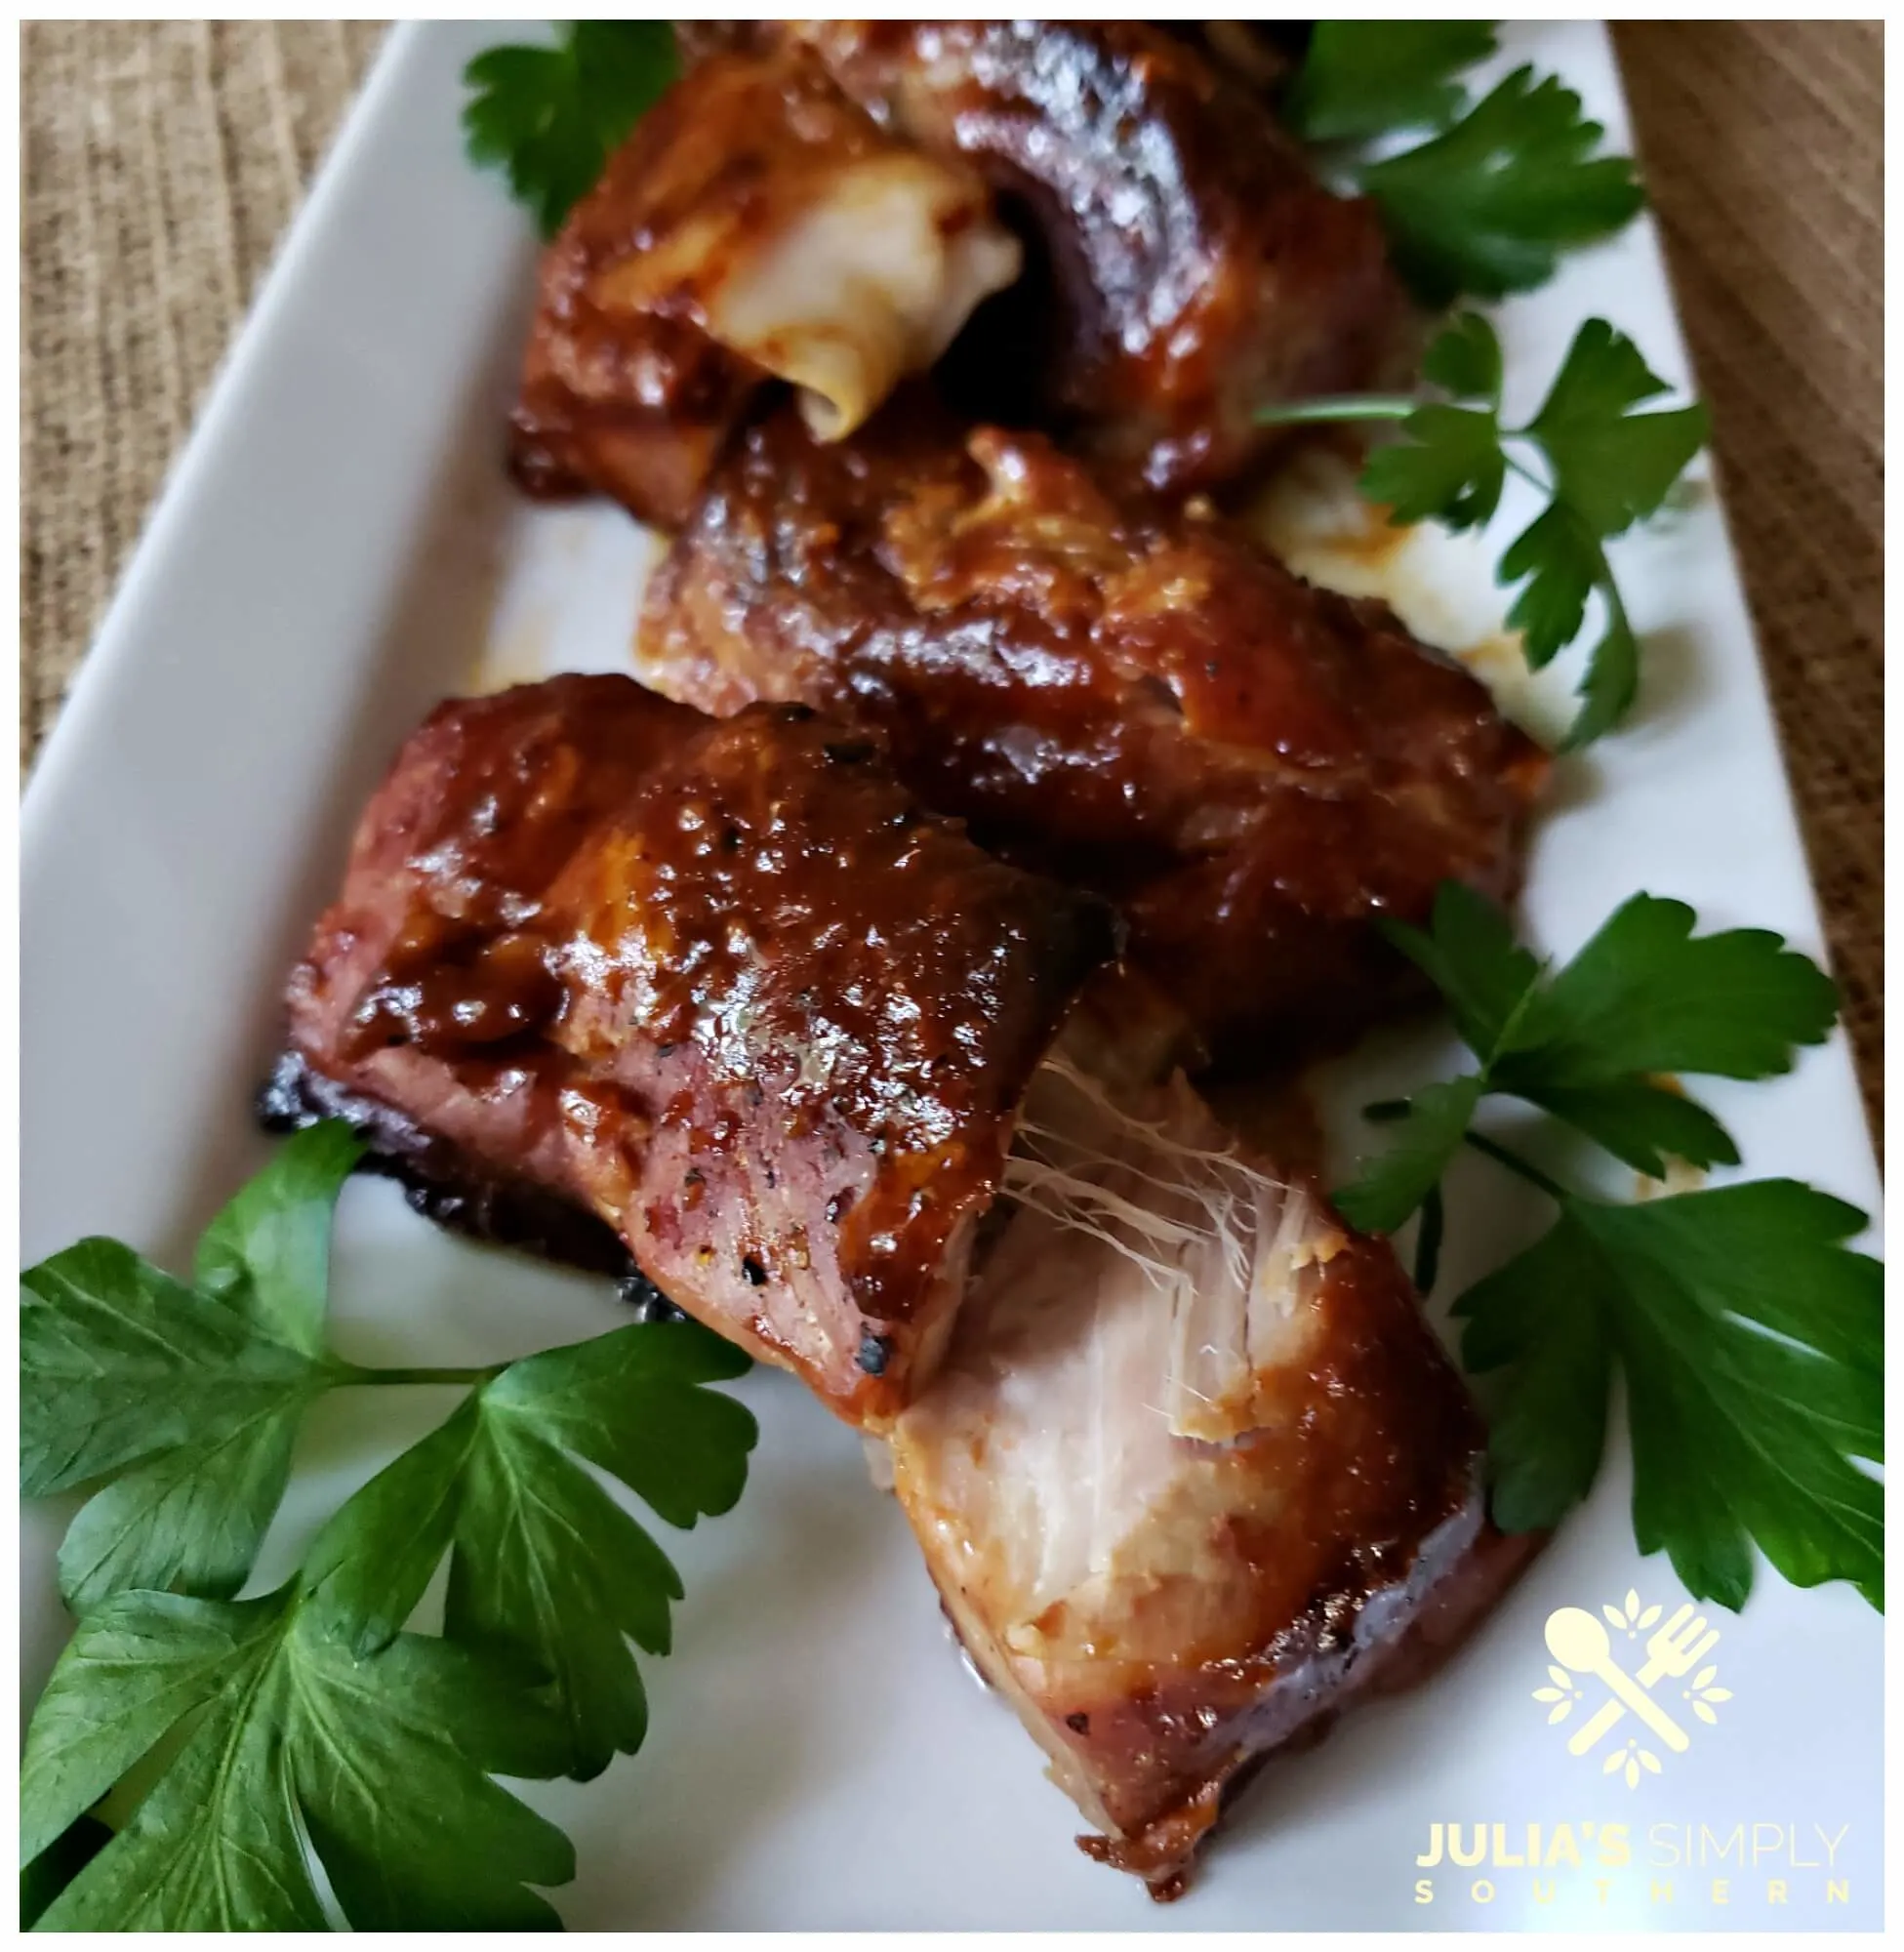 Tender boneless Easy Country-Style Pork Ribs Recipe with BBQ cooked slow in the oven until they are tender and fall apart delicious. Served on a white platter garnished with parsley.